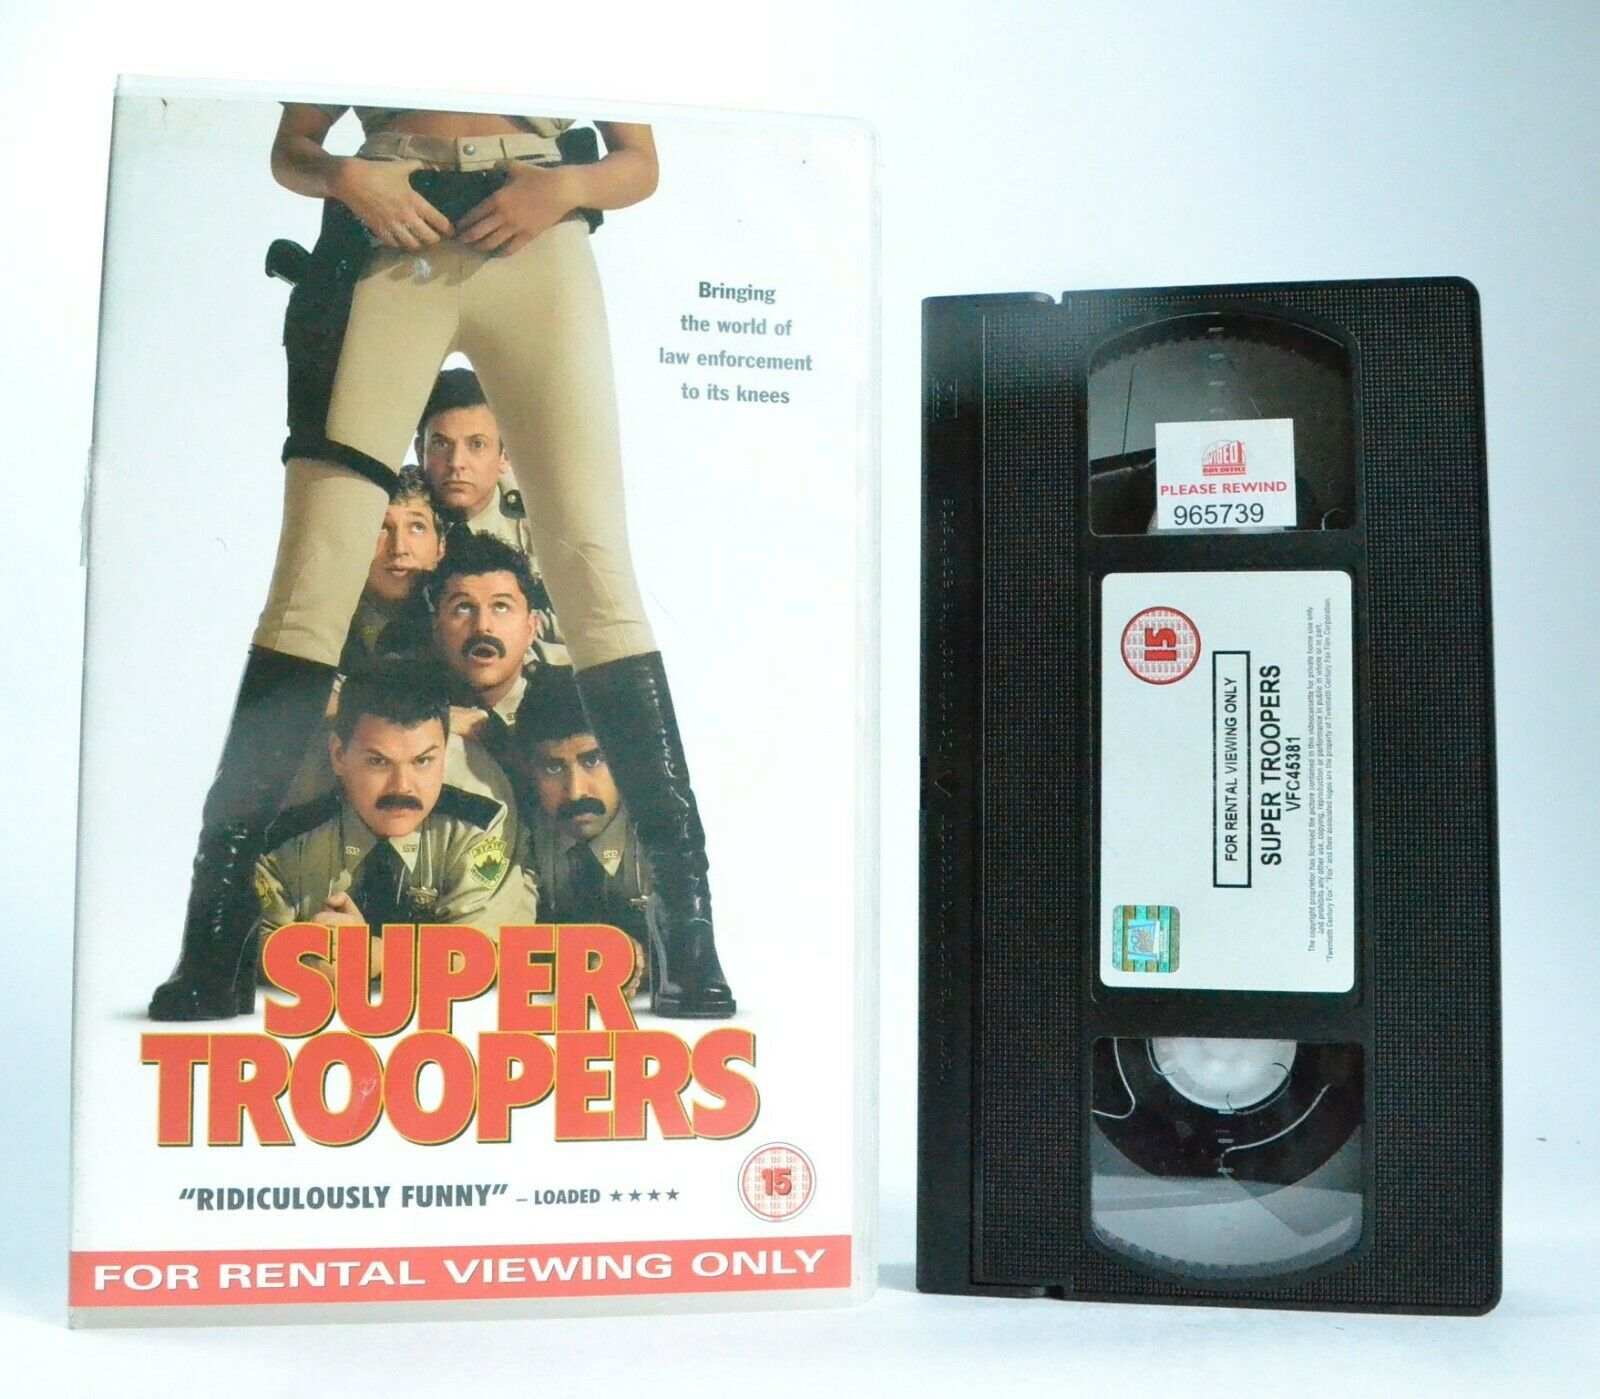 Super Troopers: Cult Classic Comedy (2001) - Vermont State Troopers Patrol - VHS-